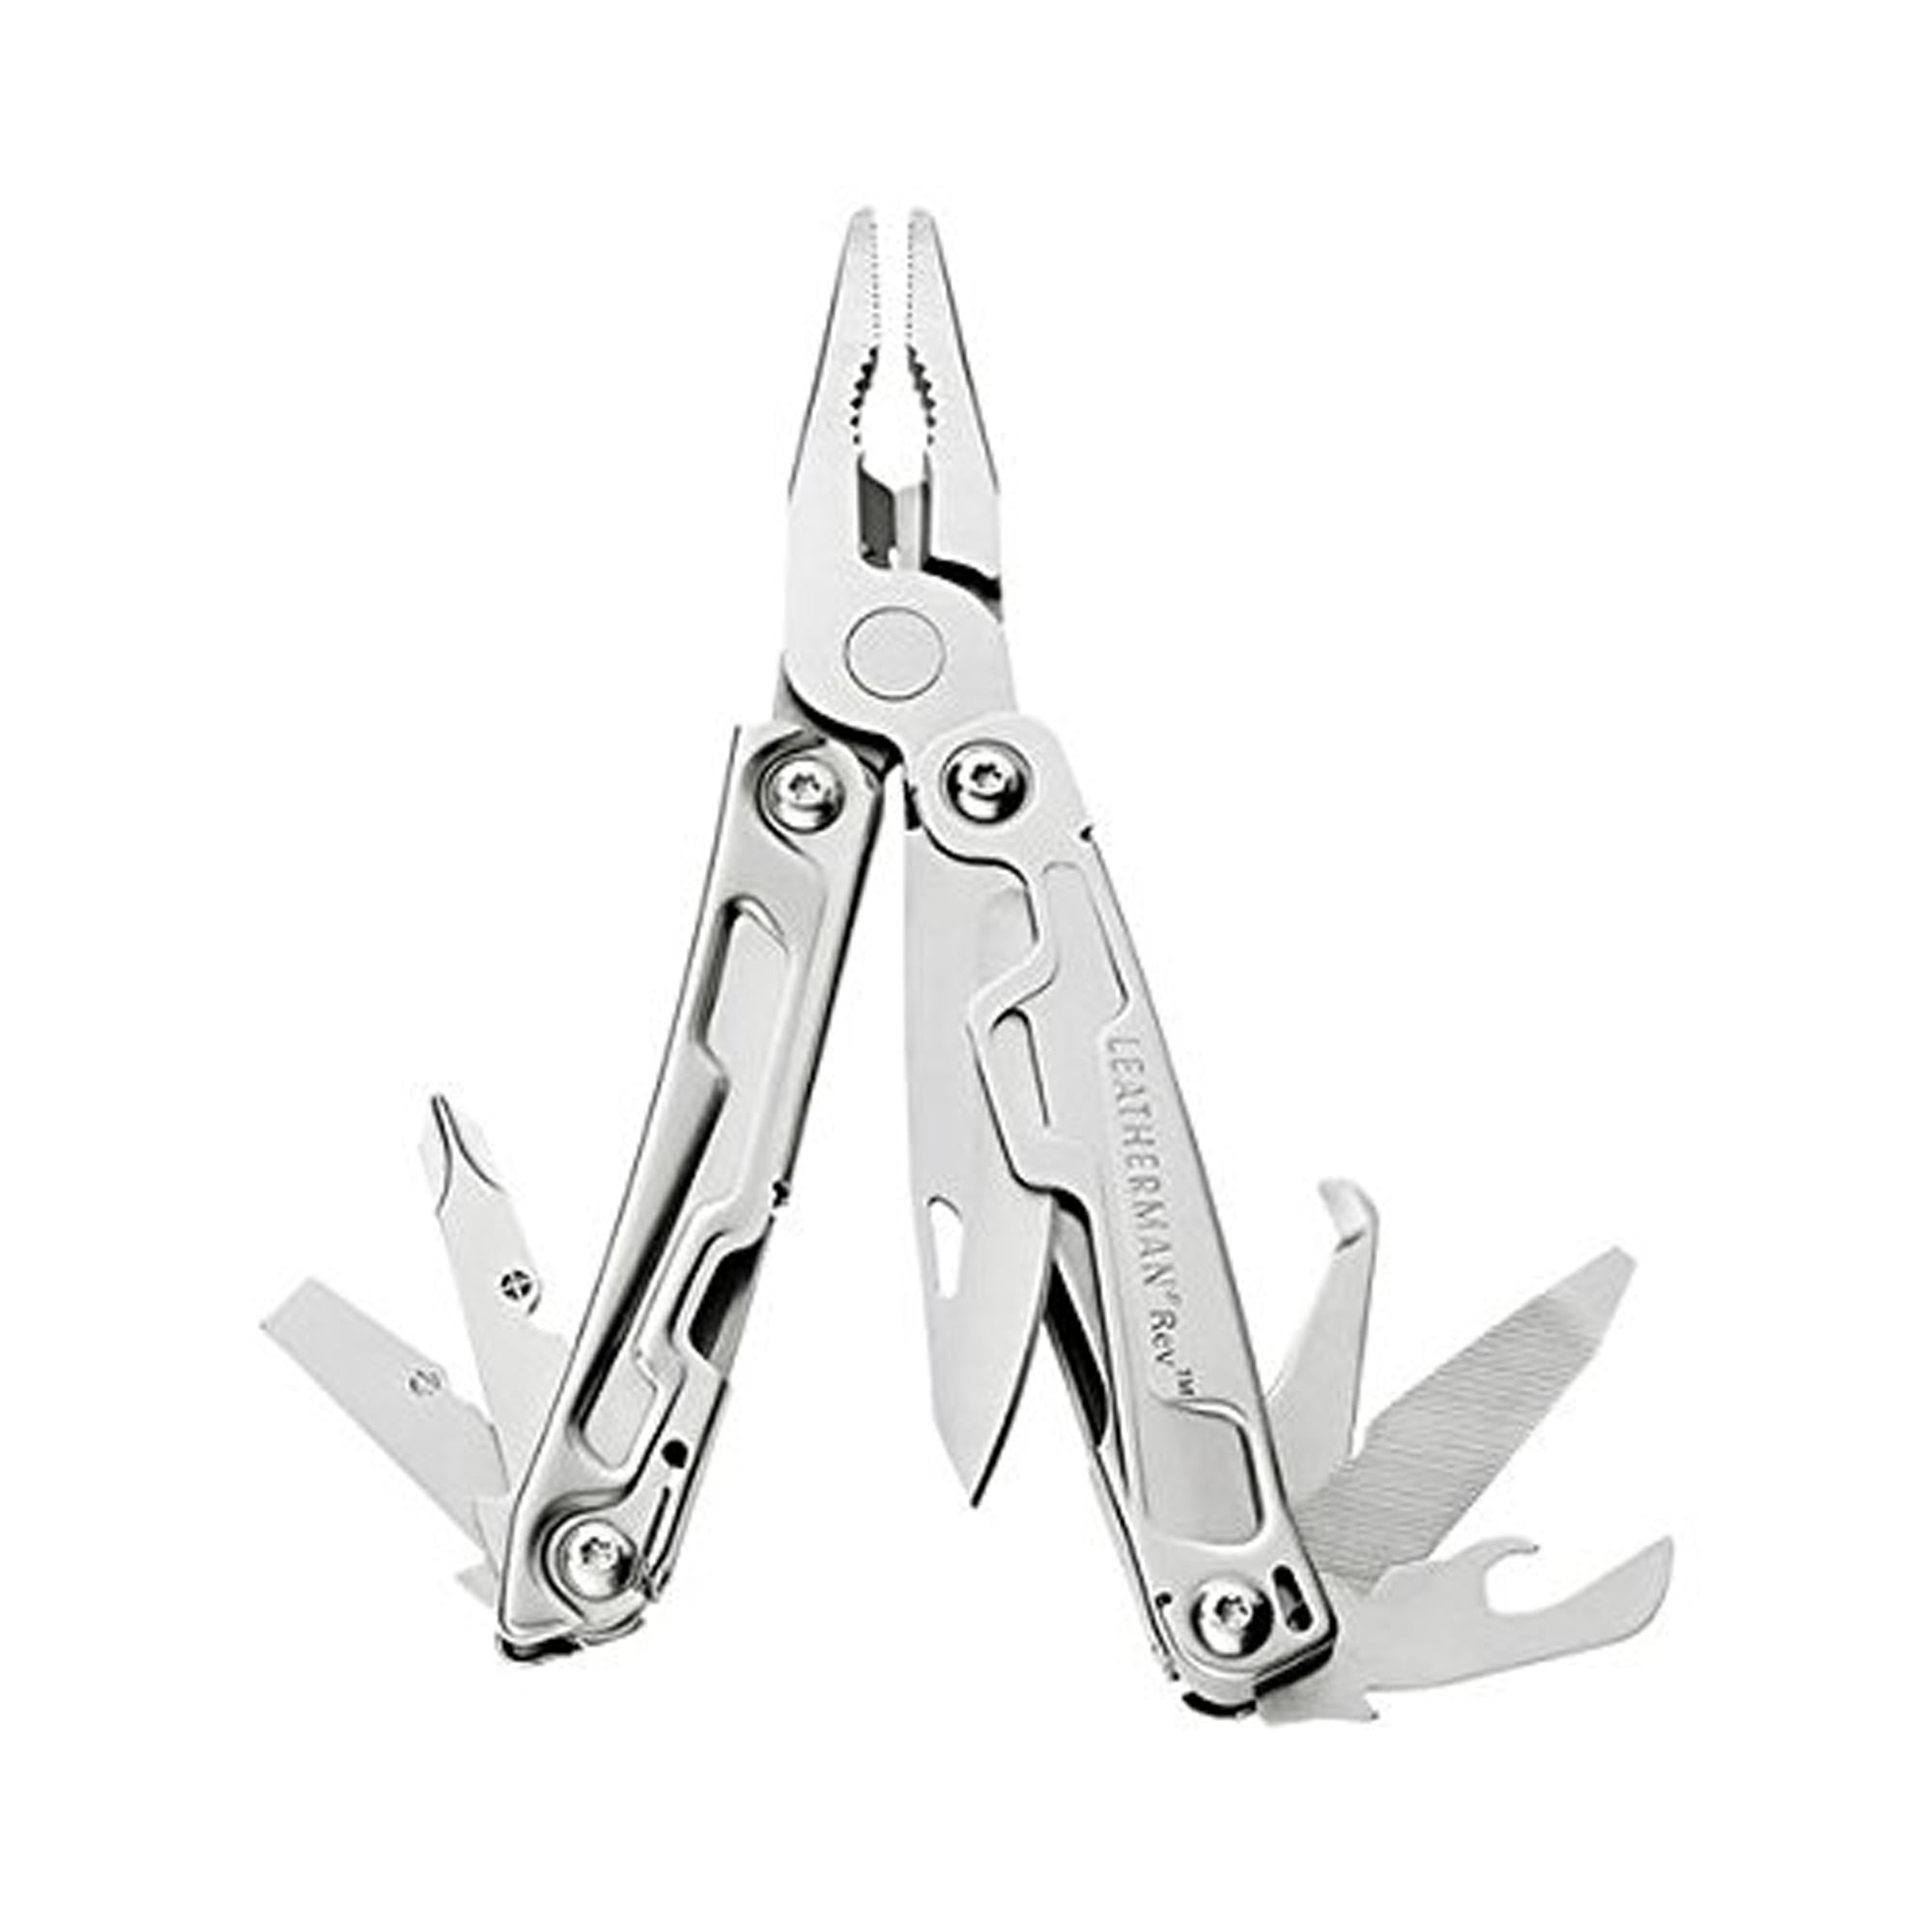 ~NEW~ Leatherman Micra Keychain Multi-Tool Stainless w/ Blue Anodized Body 